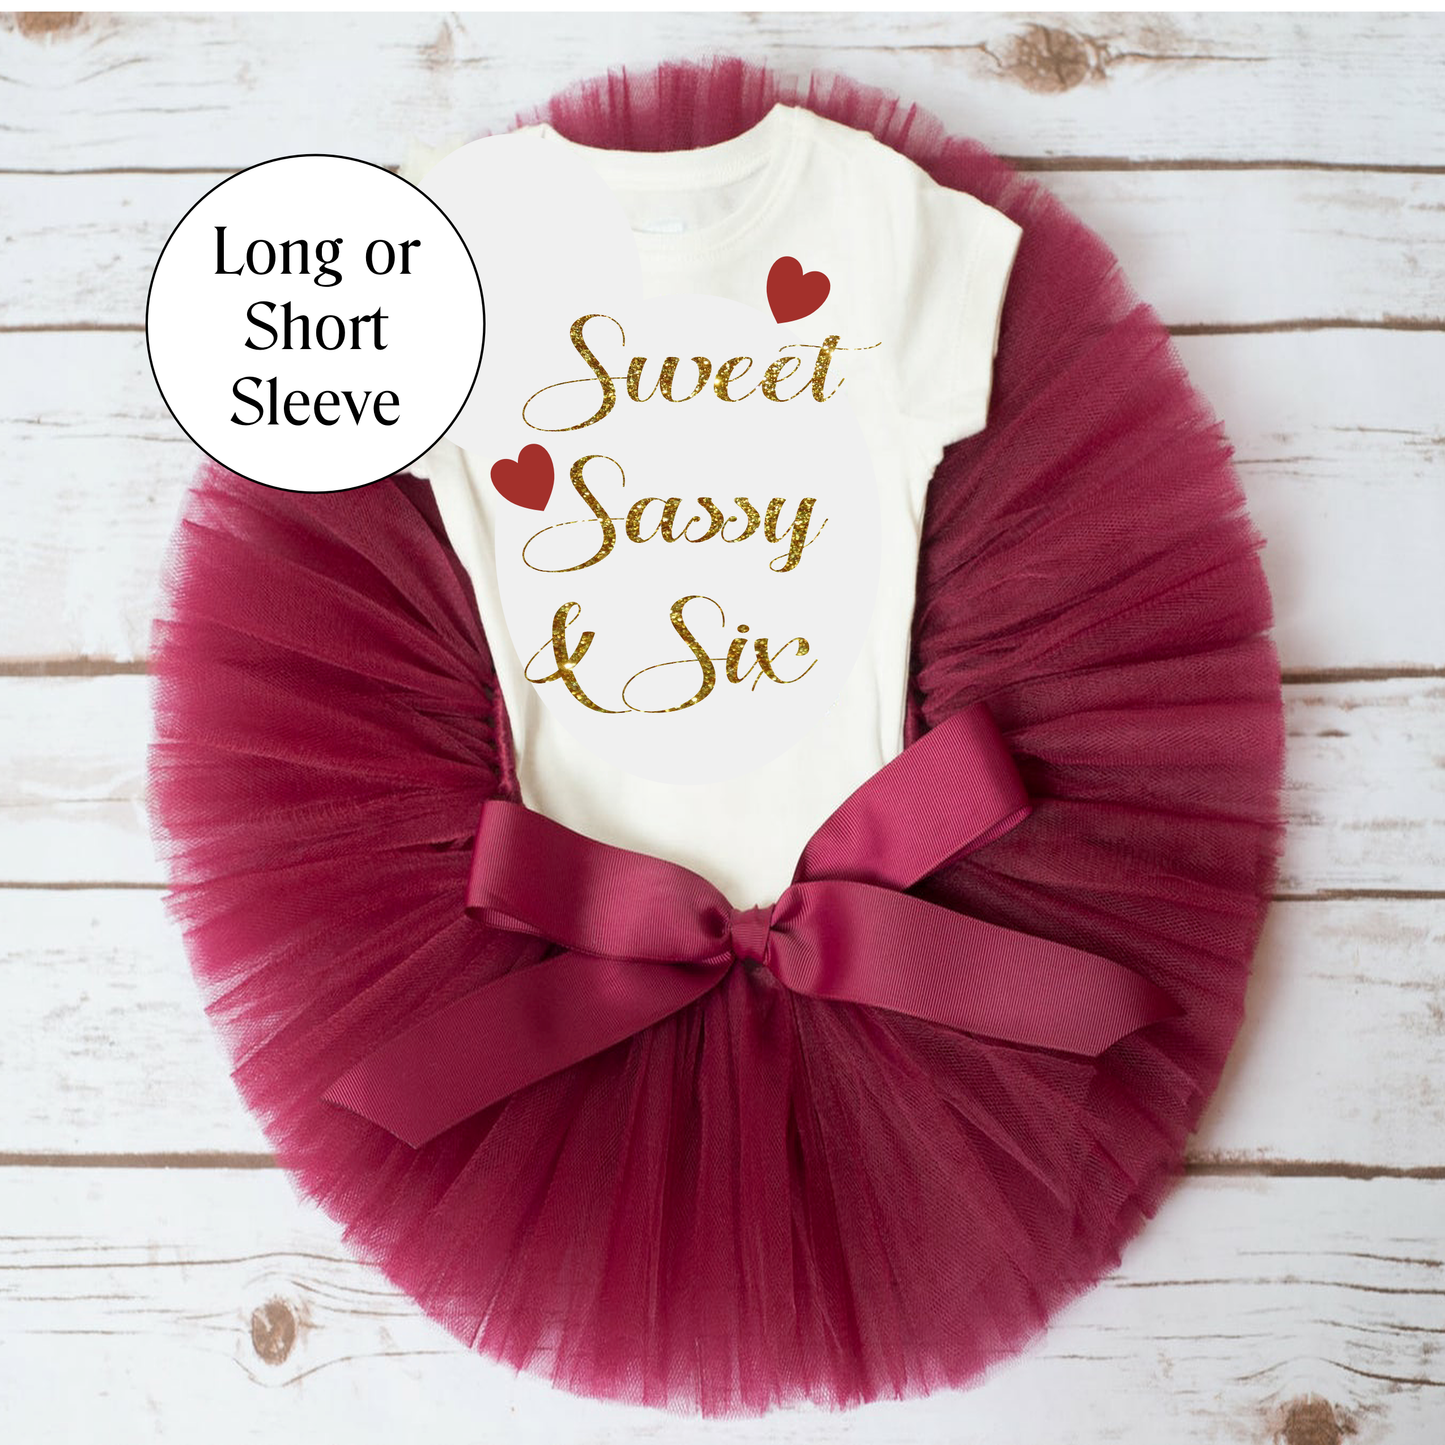 Sweet Sassy and Six tutu Outfit